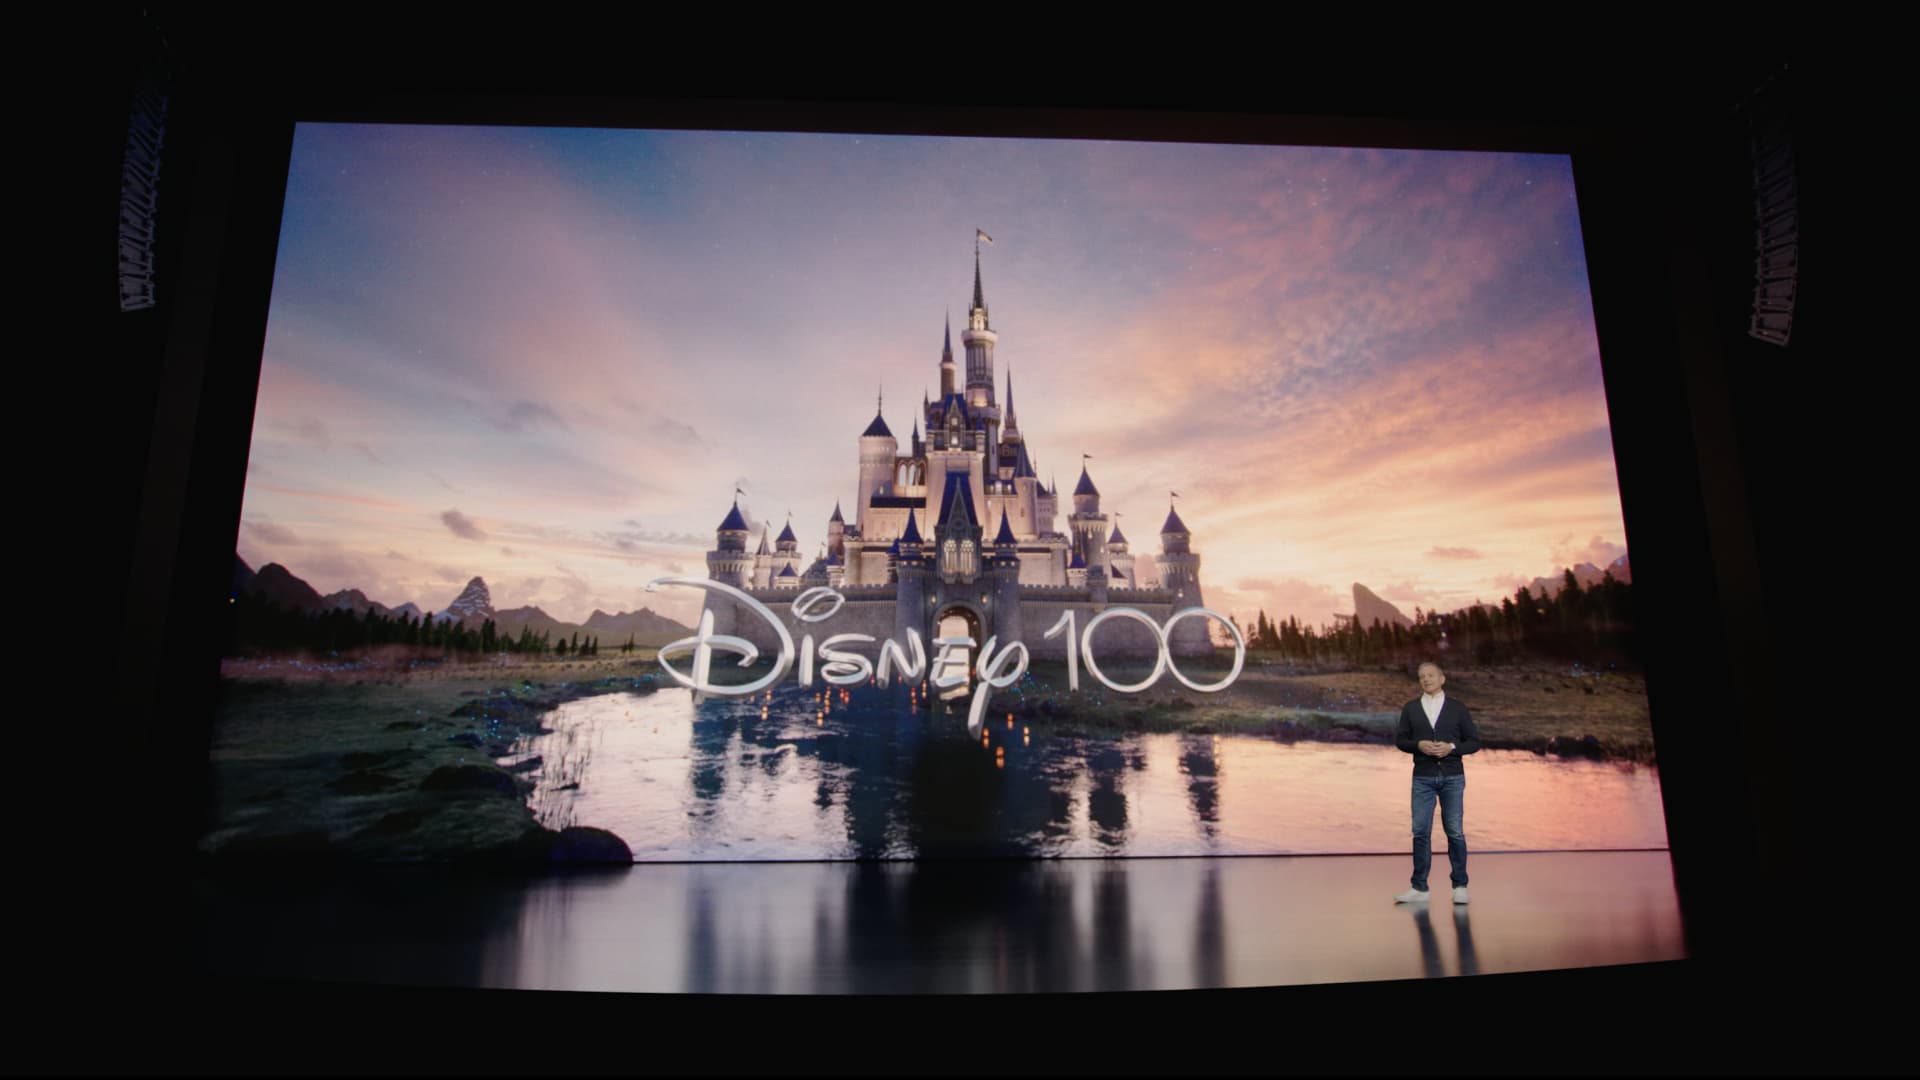 Apple’s Vision Pro headset will launch with Disney+ streaming